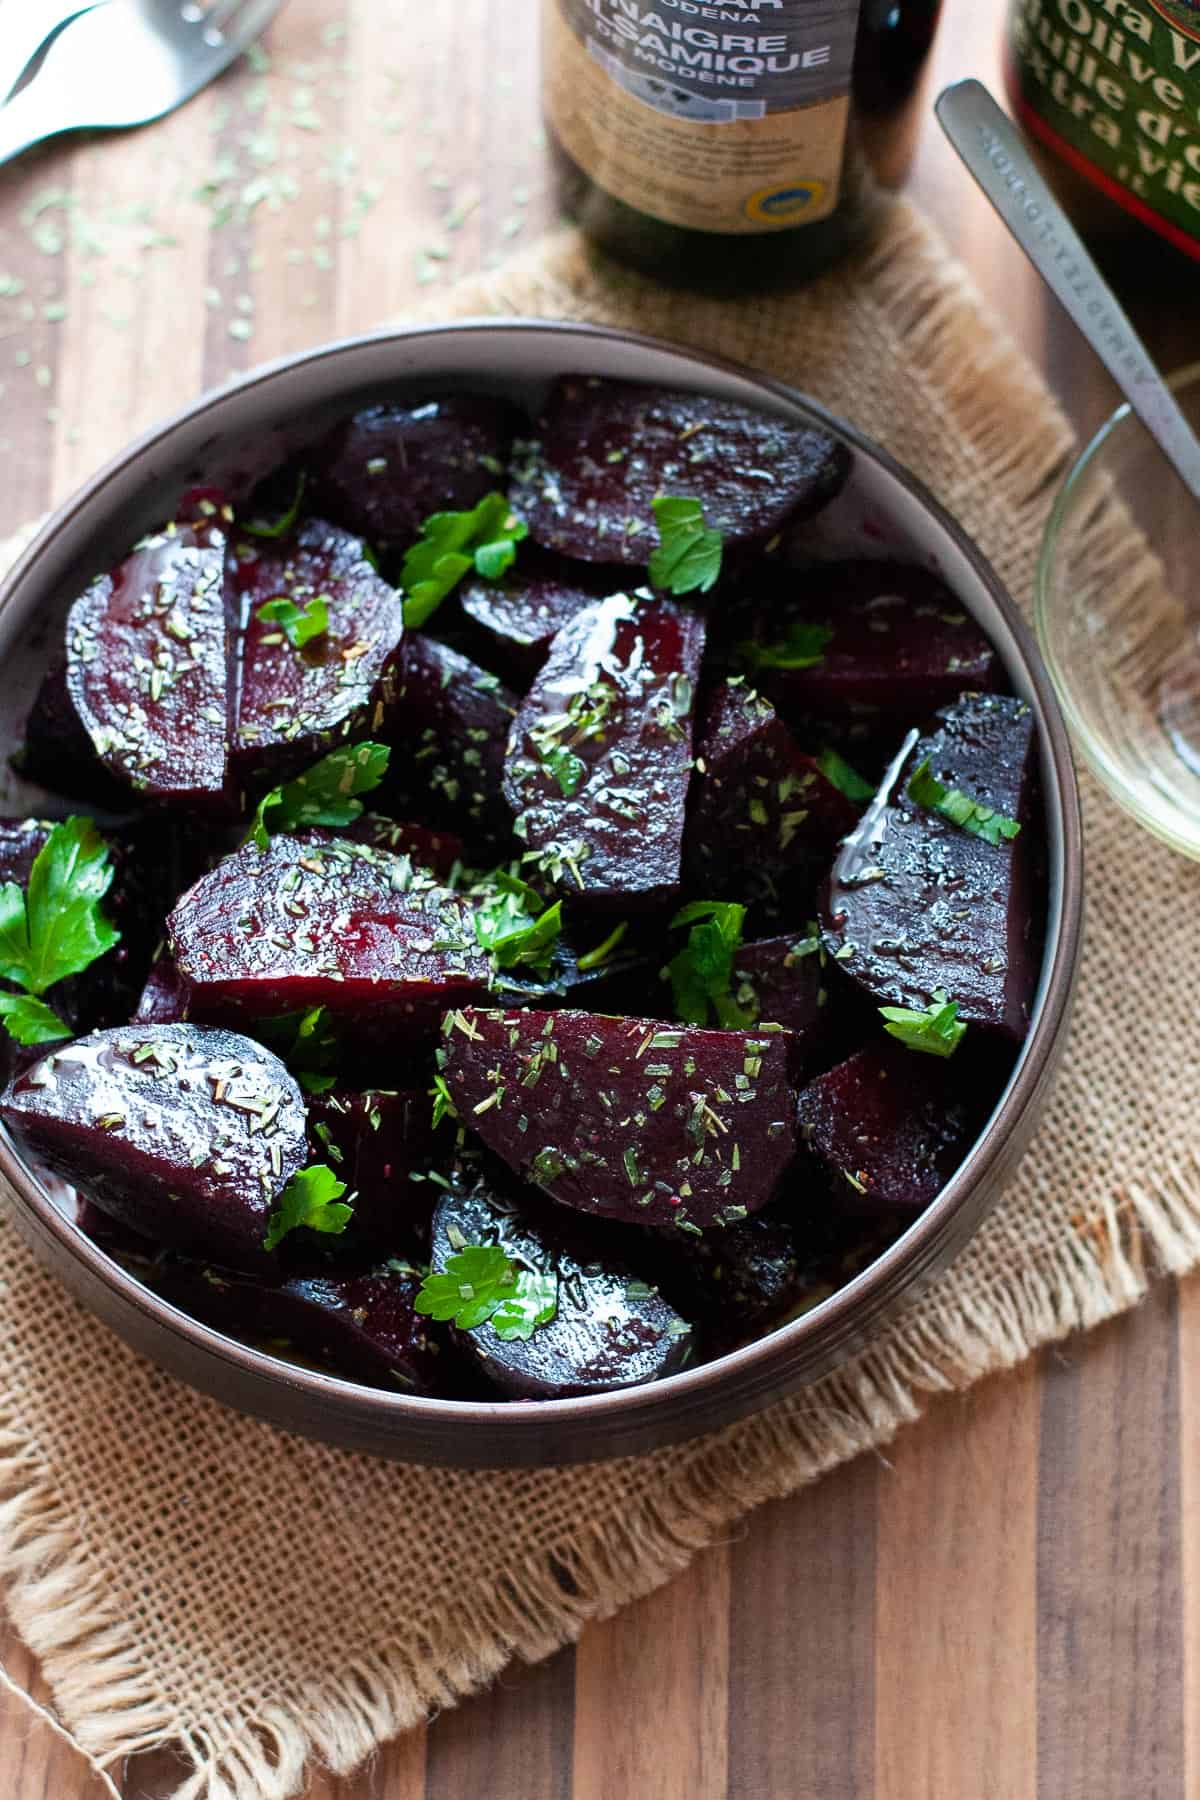 cooked and dressed beets in a bowl
